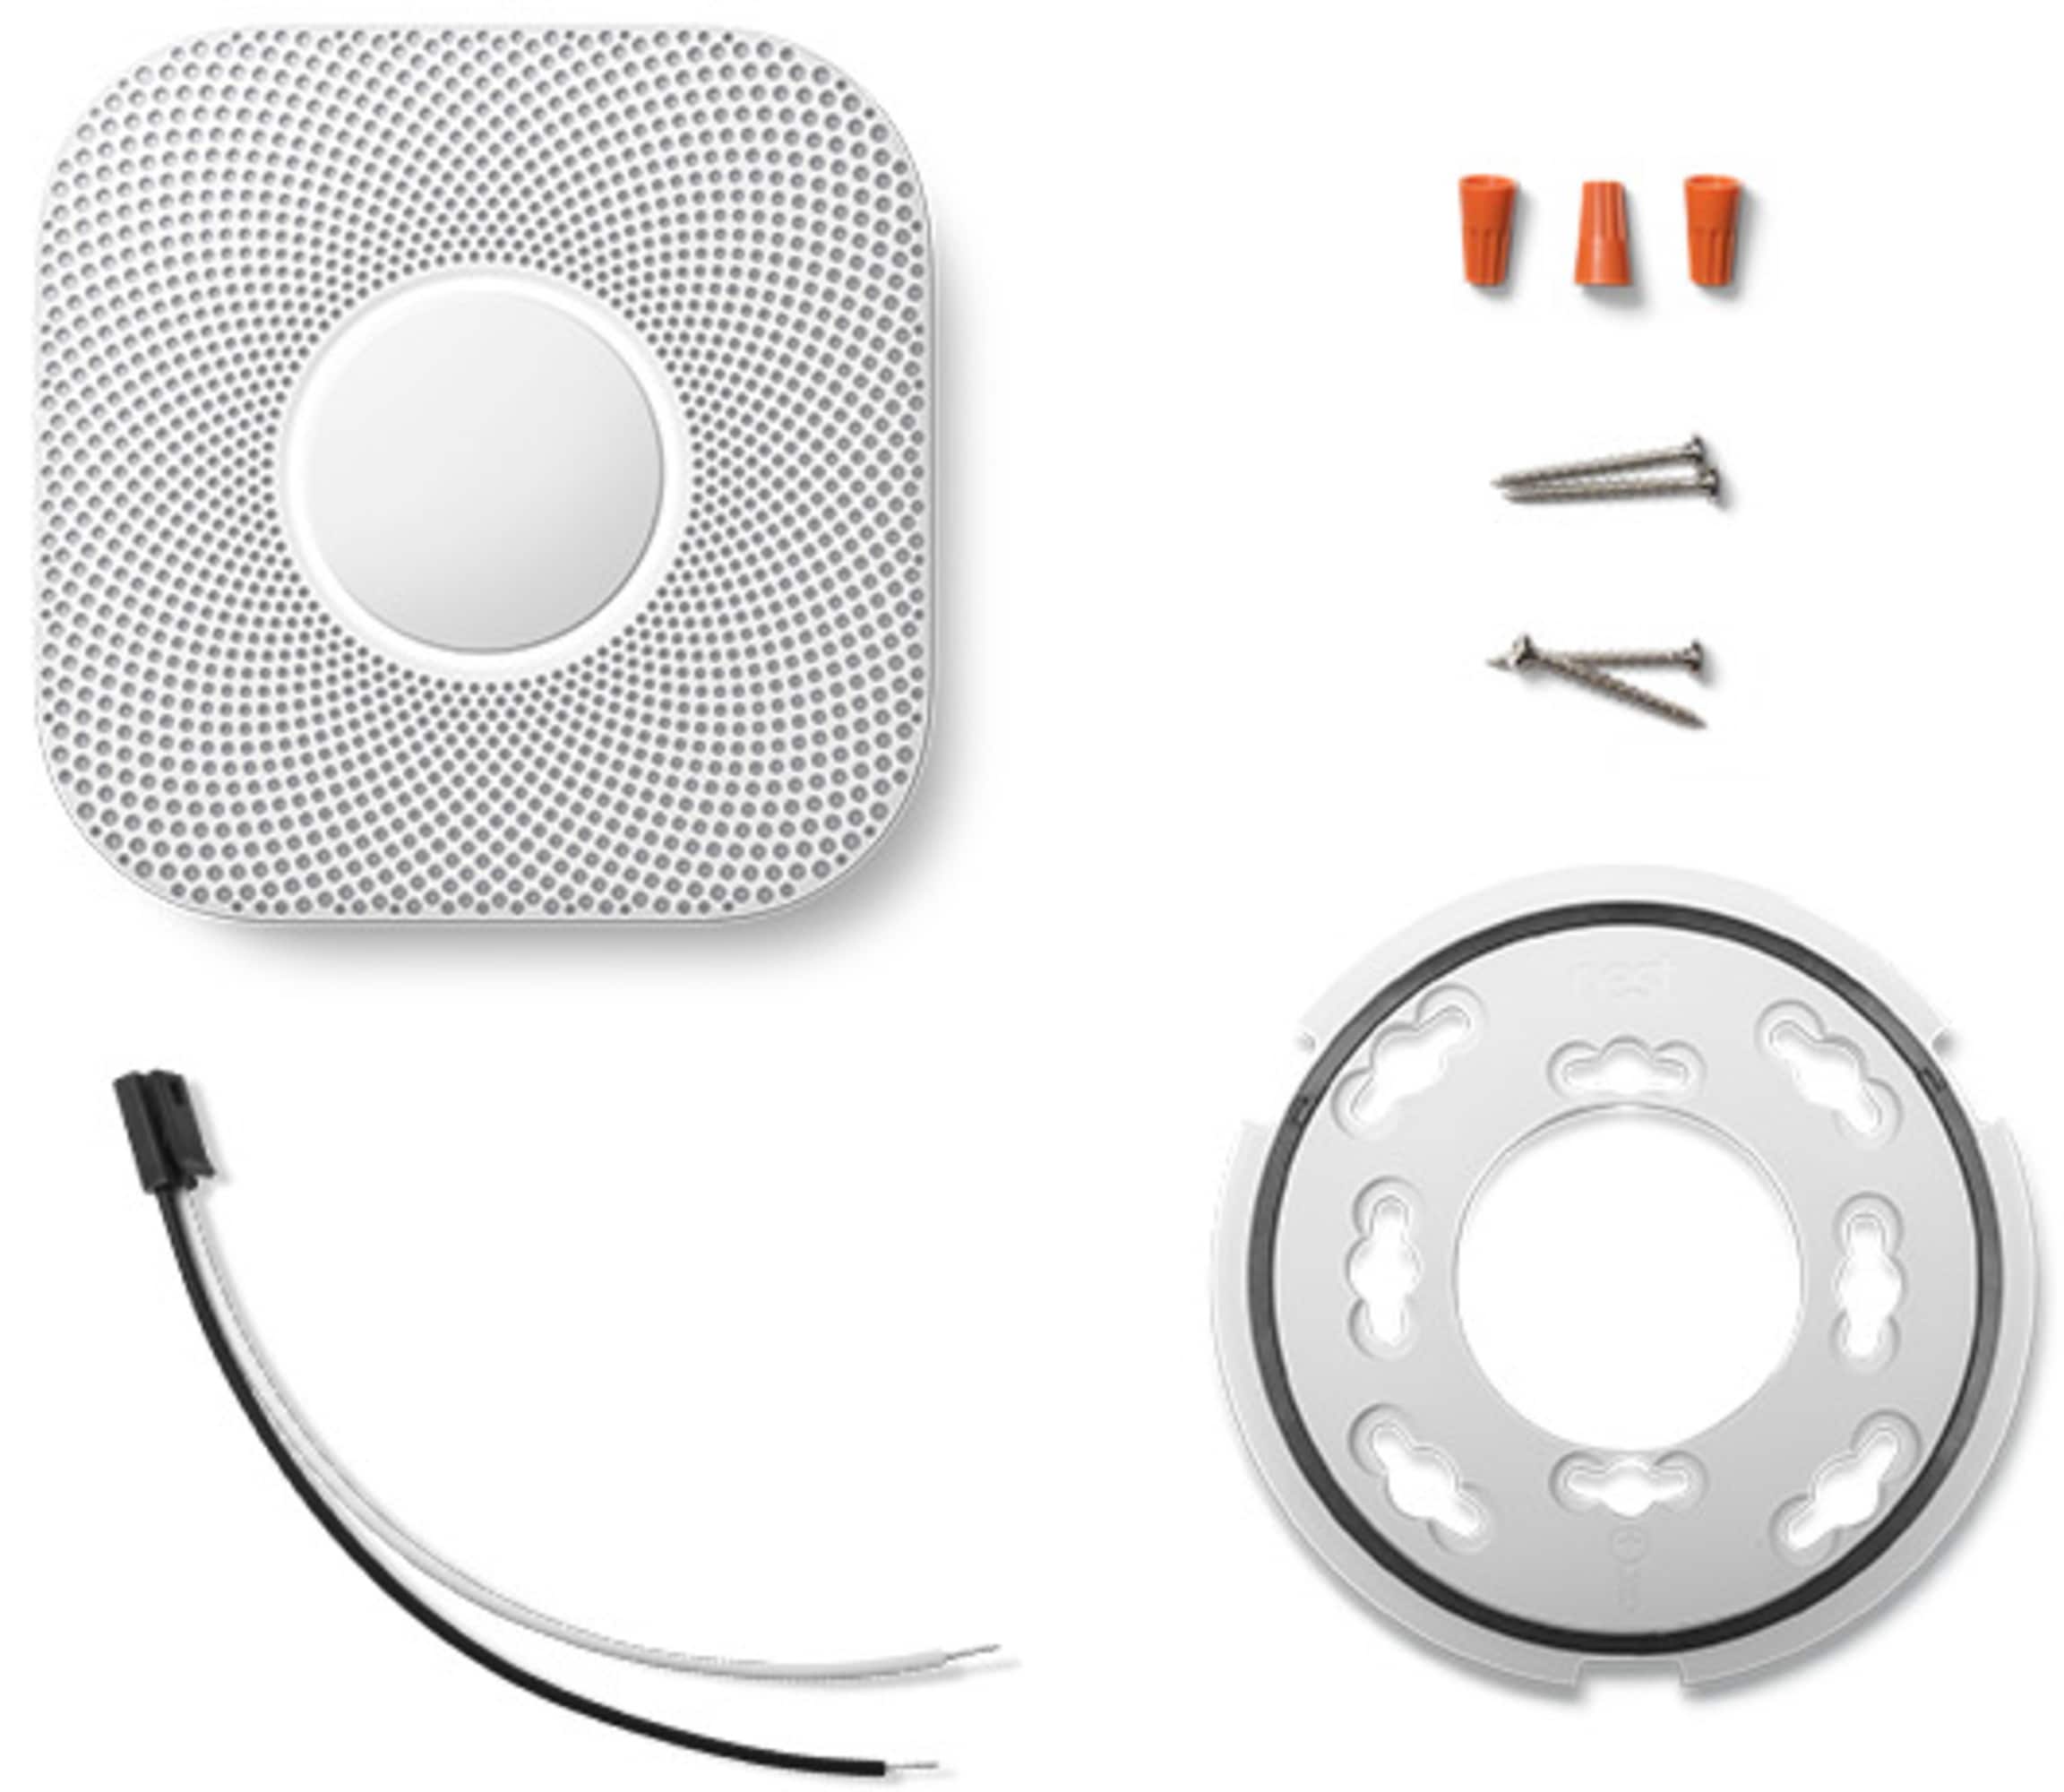 Google Nest Protect Smoke & Carbon Monoxide Alarm (Wired) - 2nd Generation